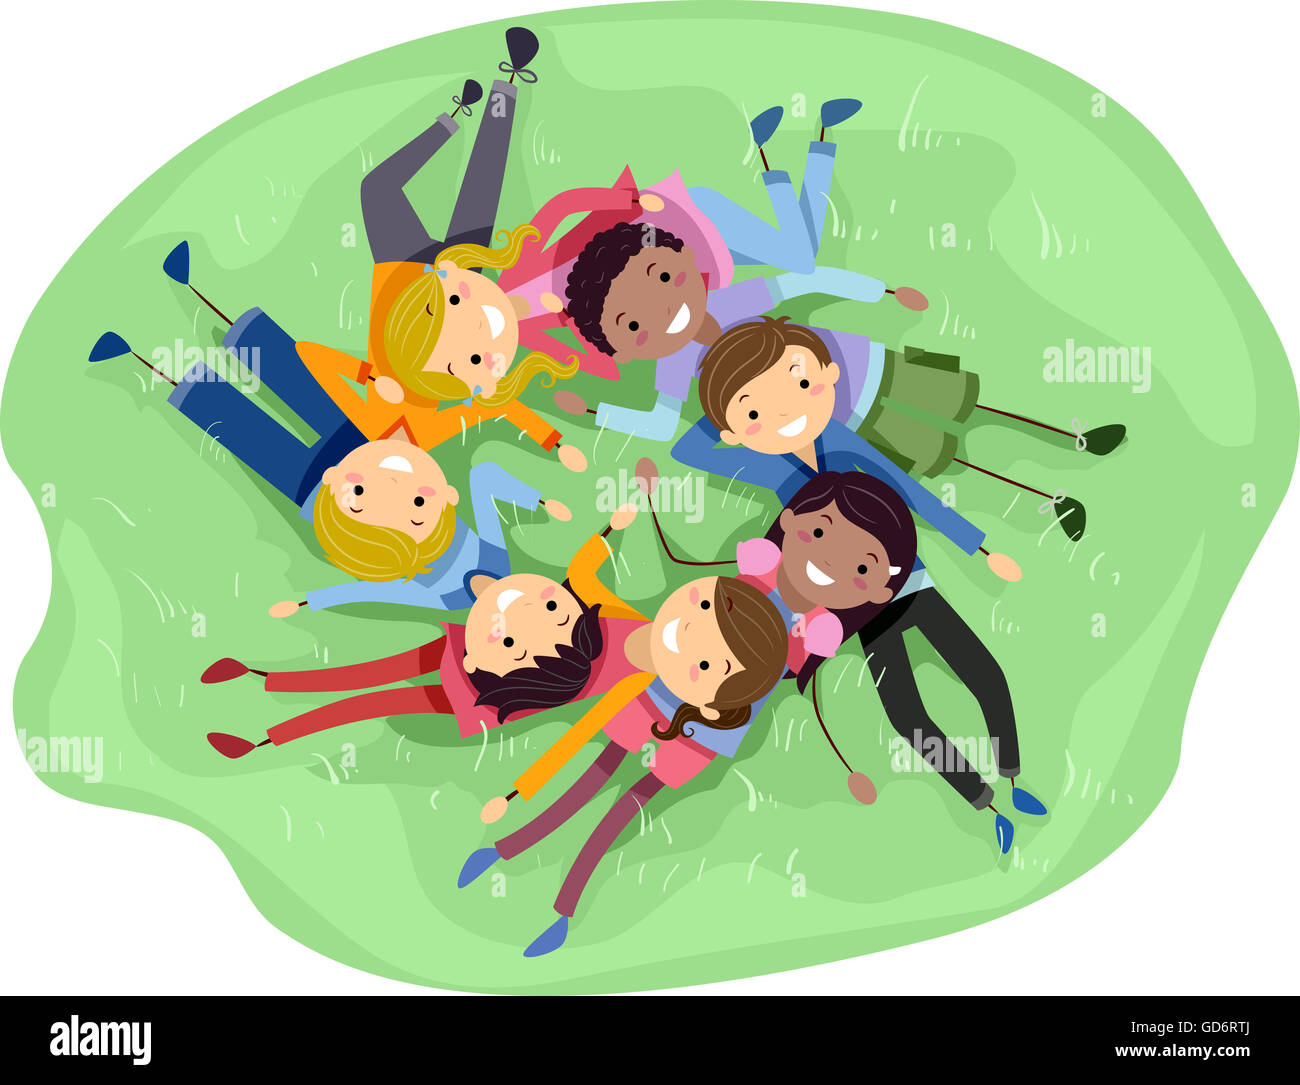 Stickman Illustration of a Diverse Group of Teens Lying on the Grass Stock Photo